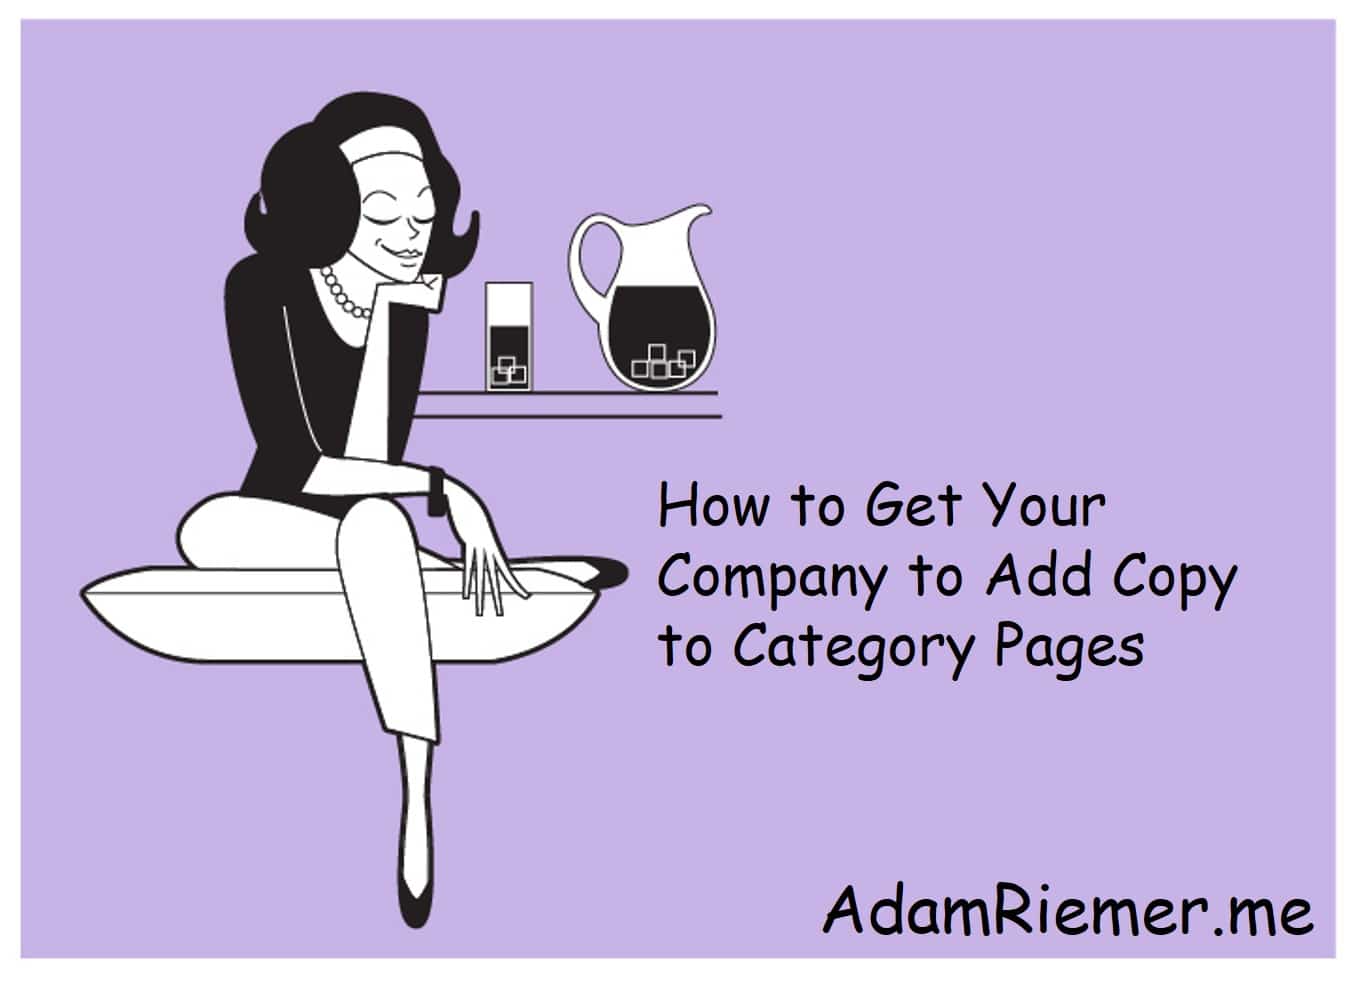 How to Get Your Company to Add Copy to Category Pages